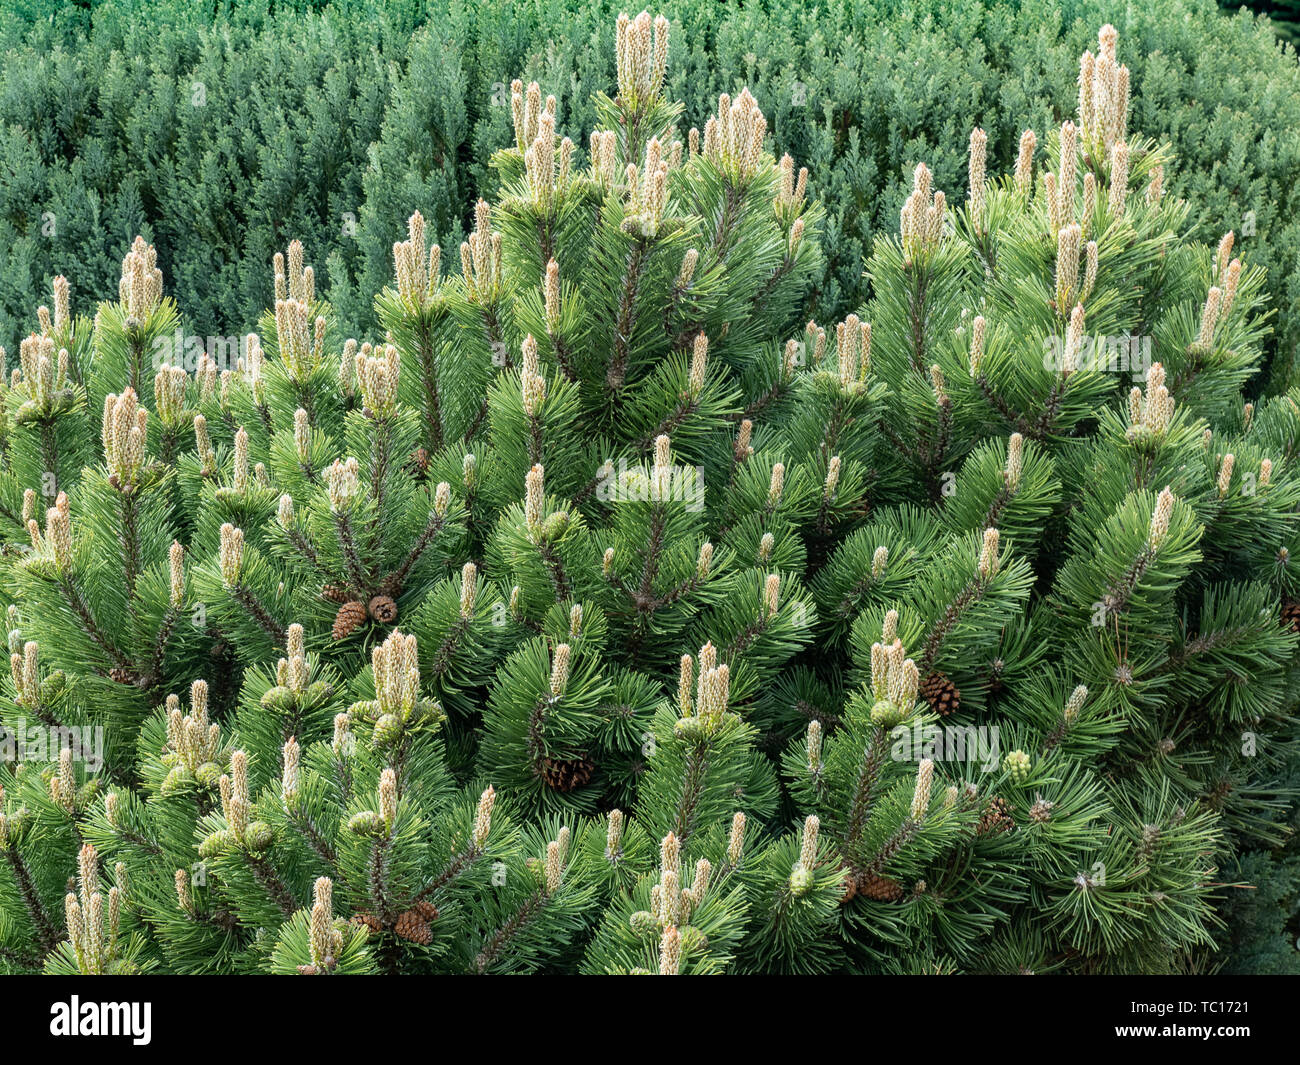 A large plant of Pinus mugo showing covered in male flowers Stock Photo